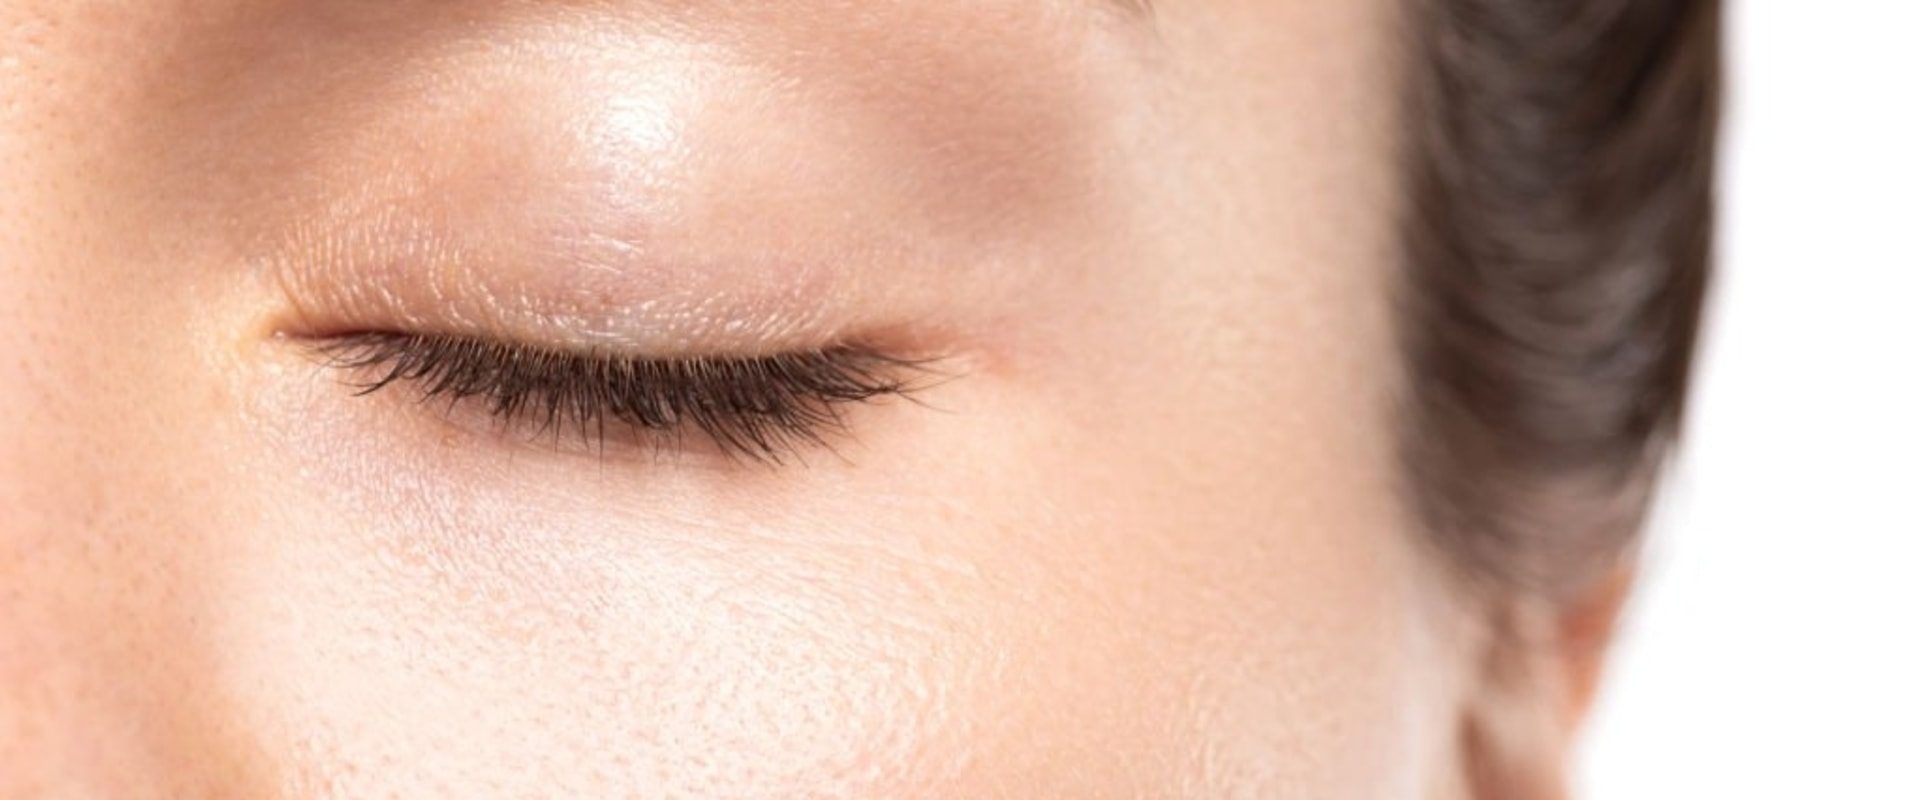 How Long Does It Take for Eyelashes to Grow Back After Removing Extensions?